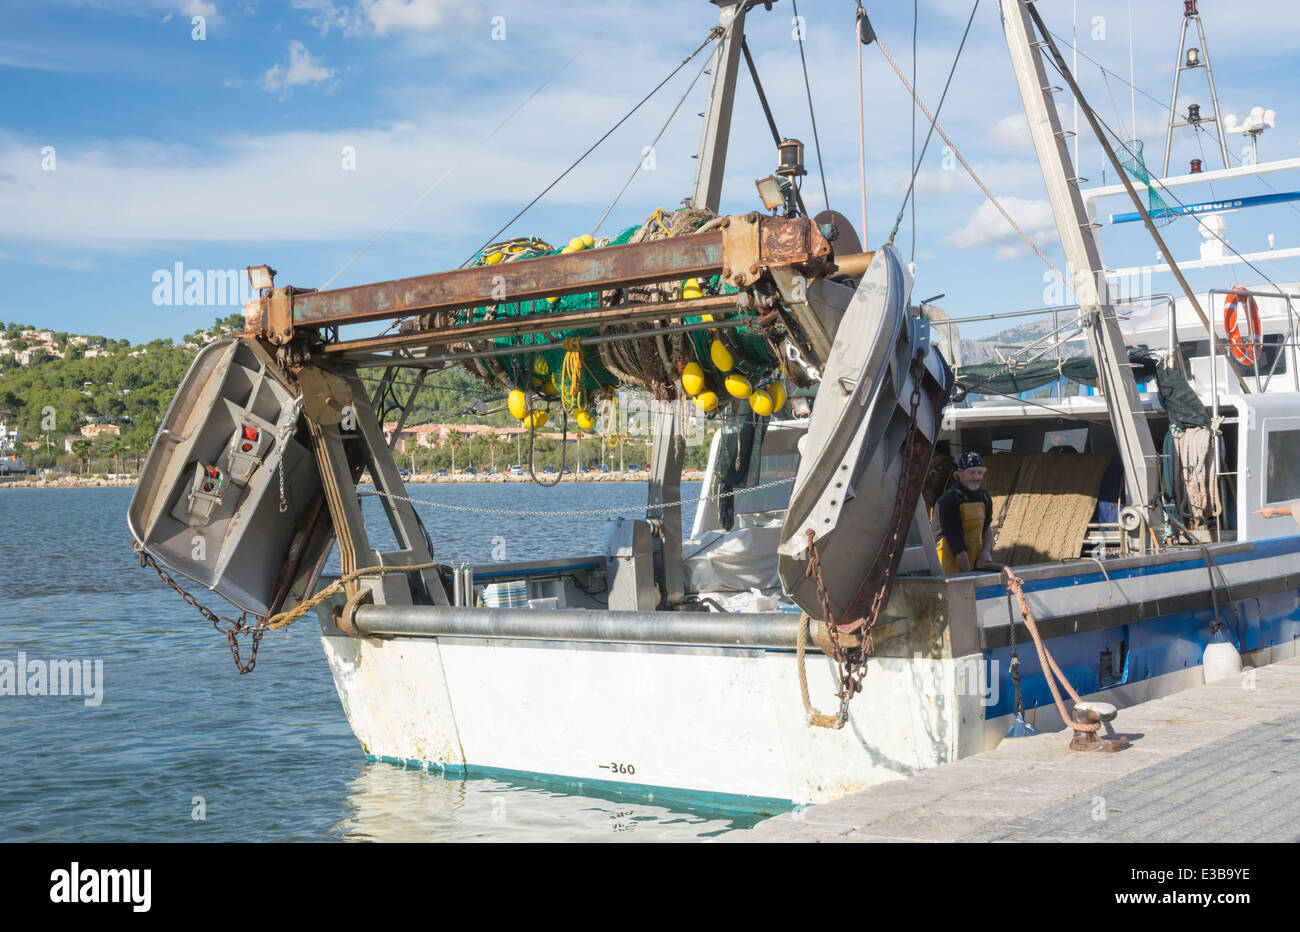 Fishing boat stern on the quay in Port d'Andratx, Mallorca, Balearic islands, Spain in October 2013. Stock Photo